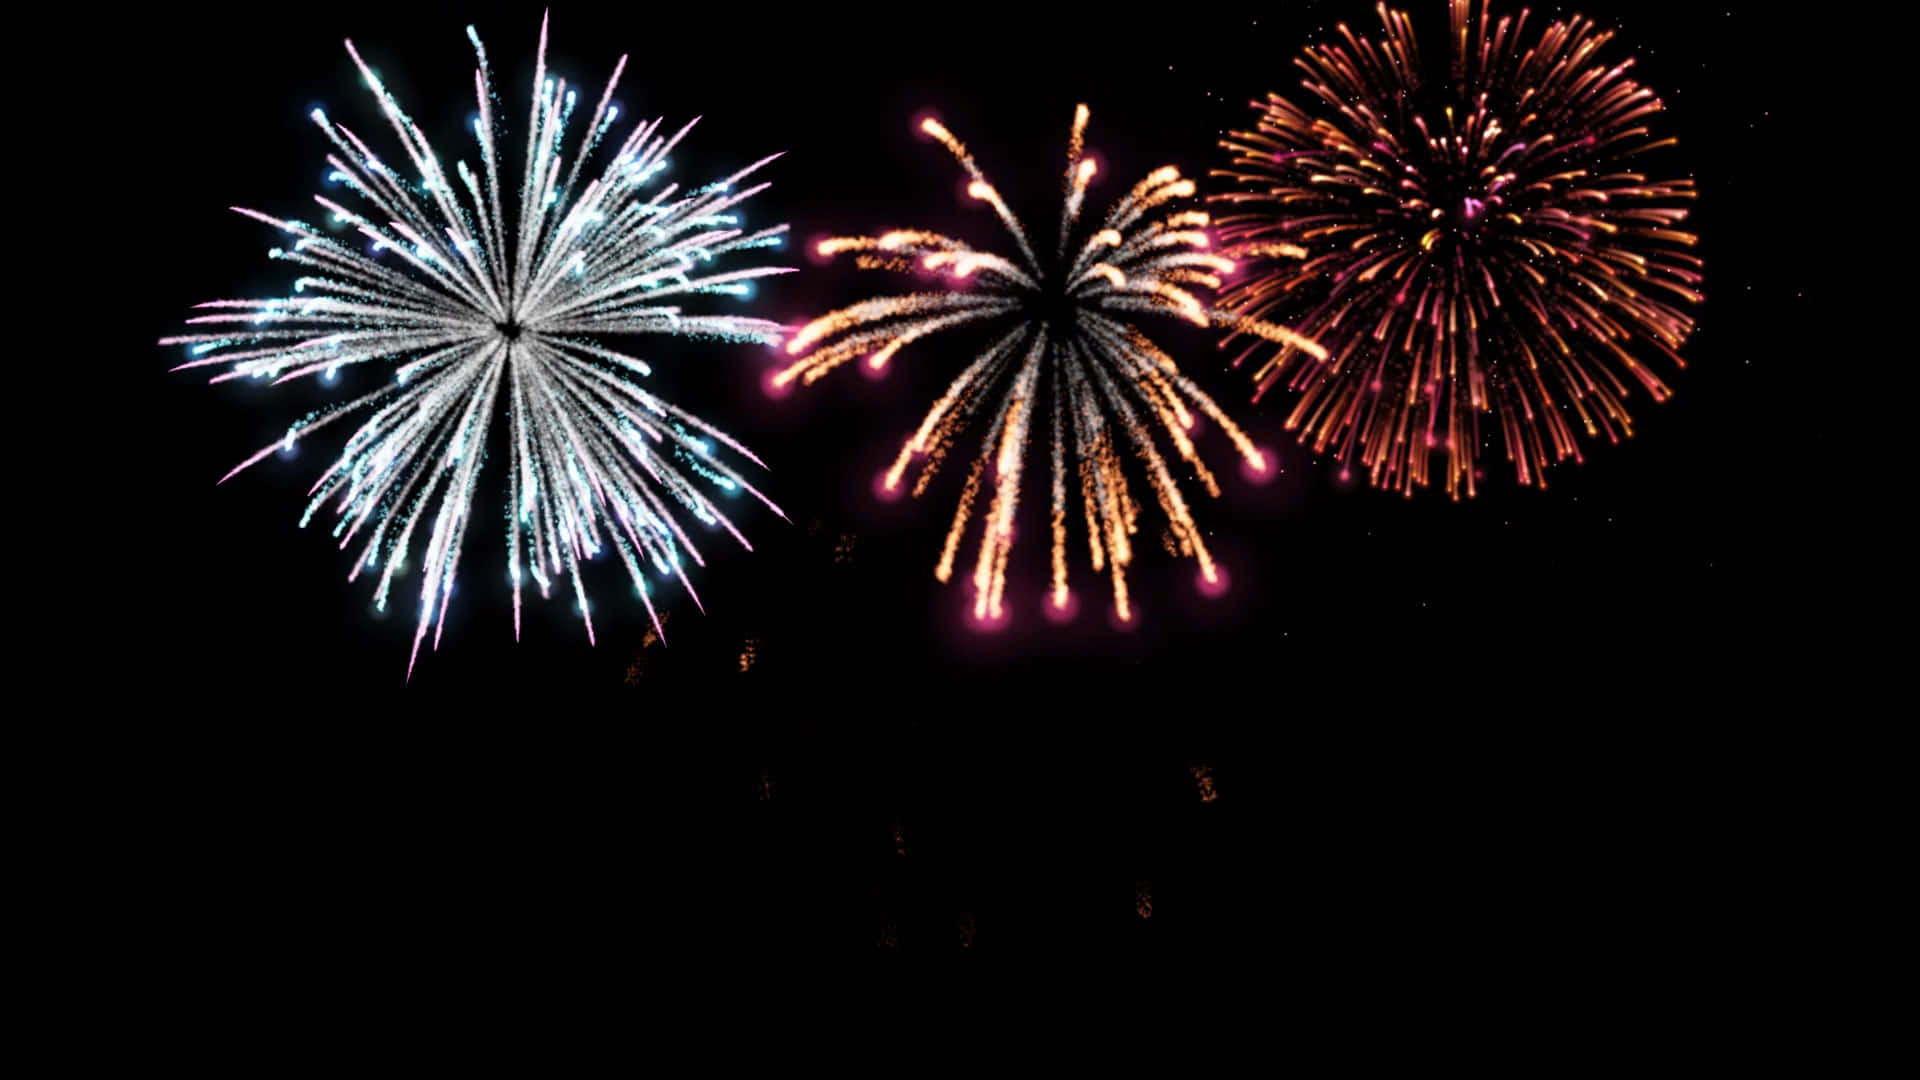 Make a wish! Celebrate life's special moments with an awe-inspiring firework display.